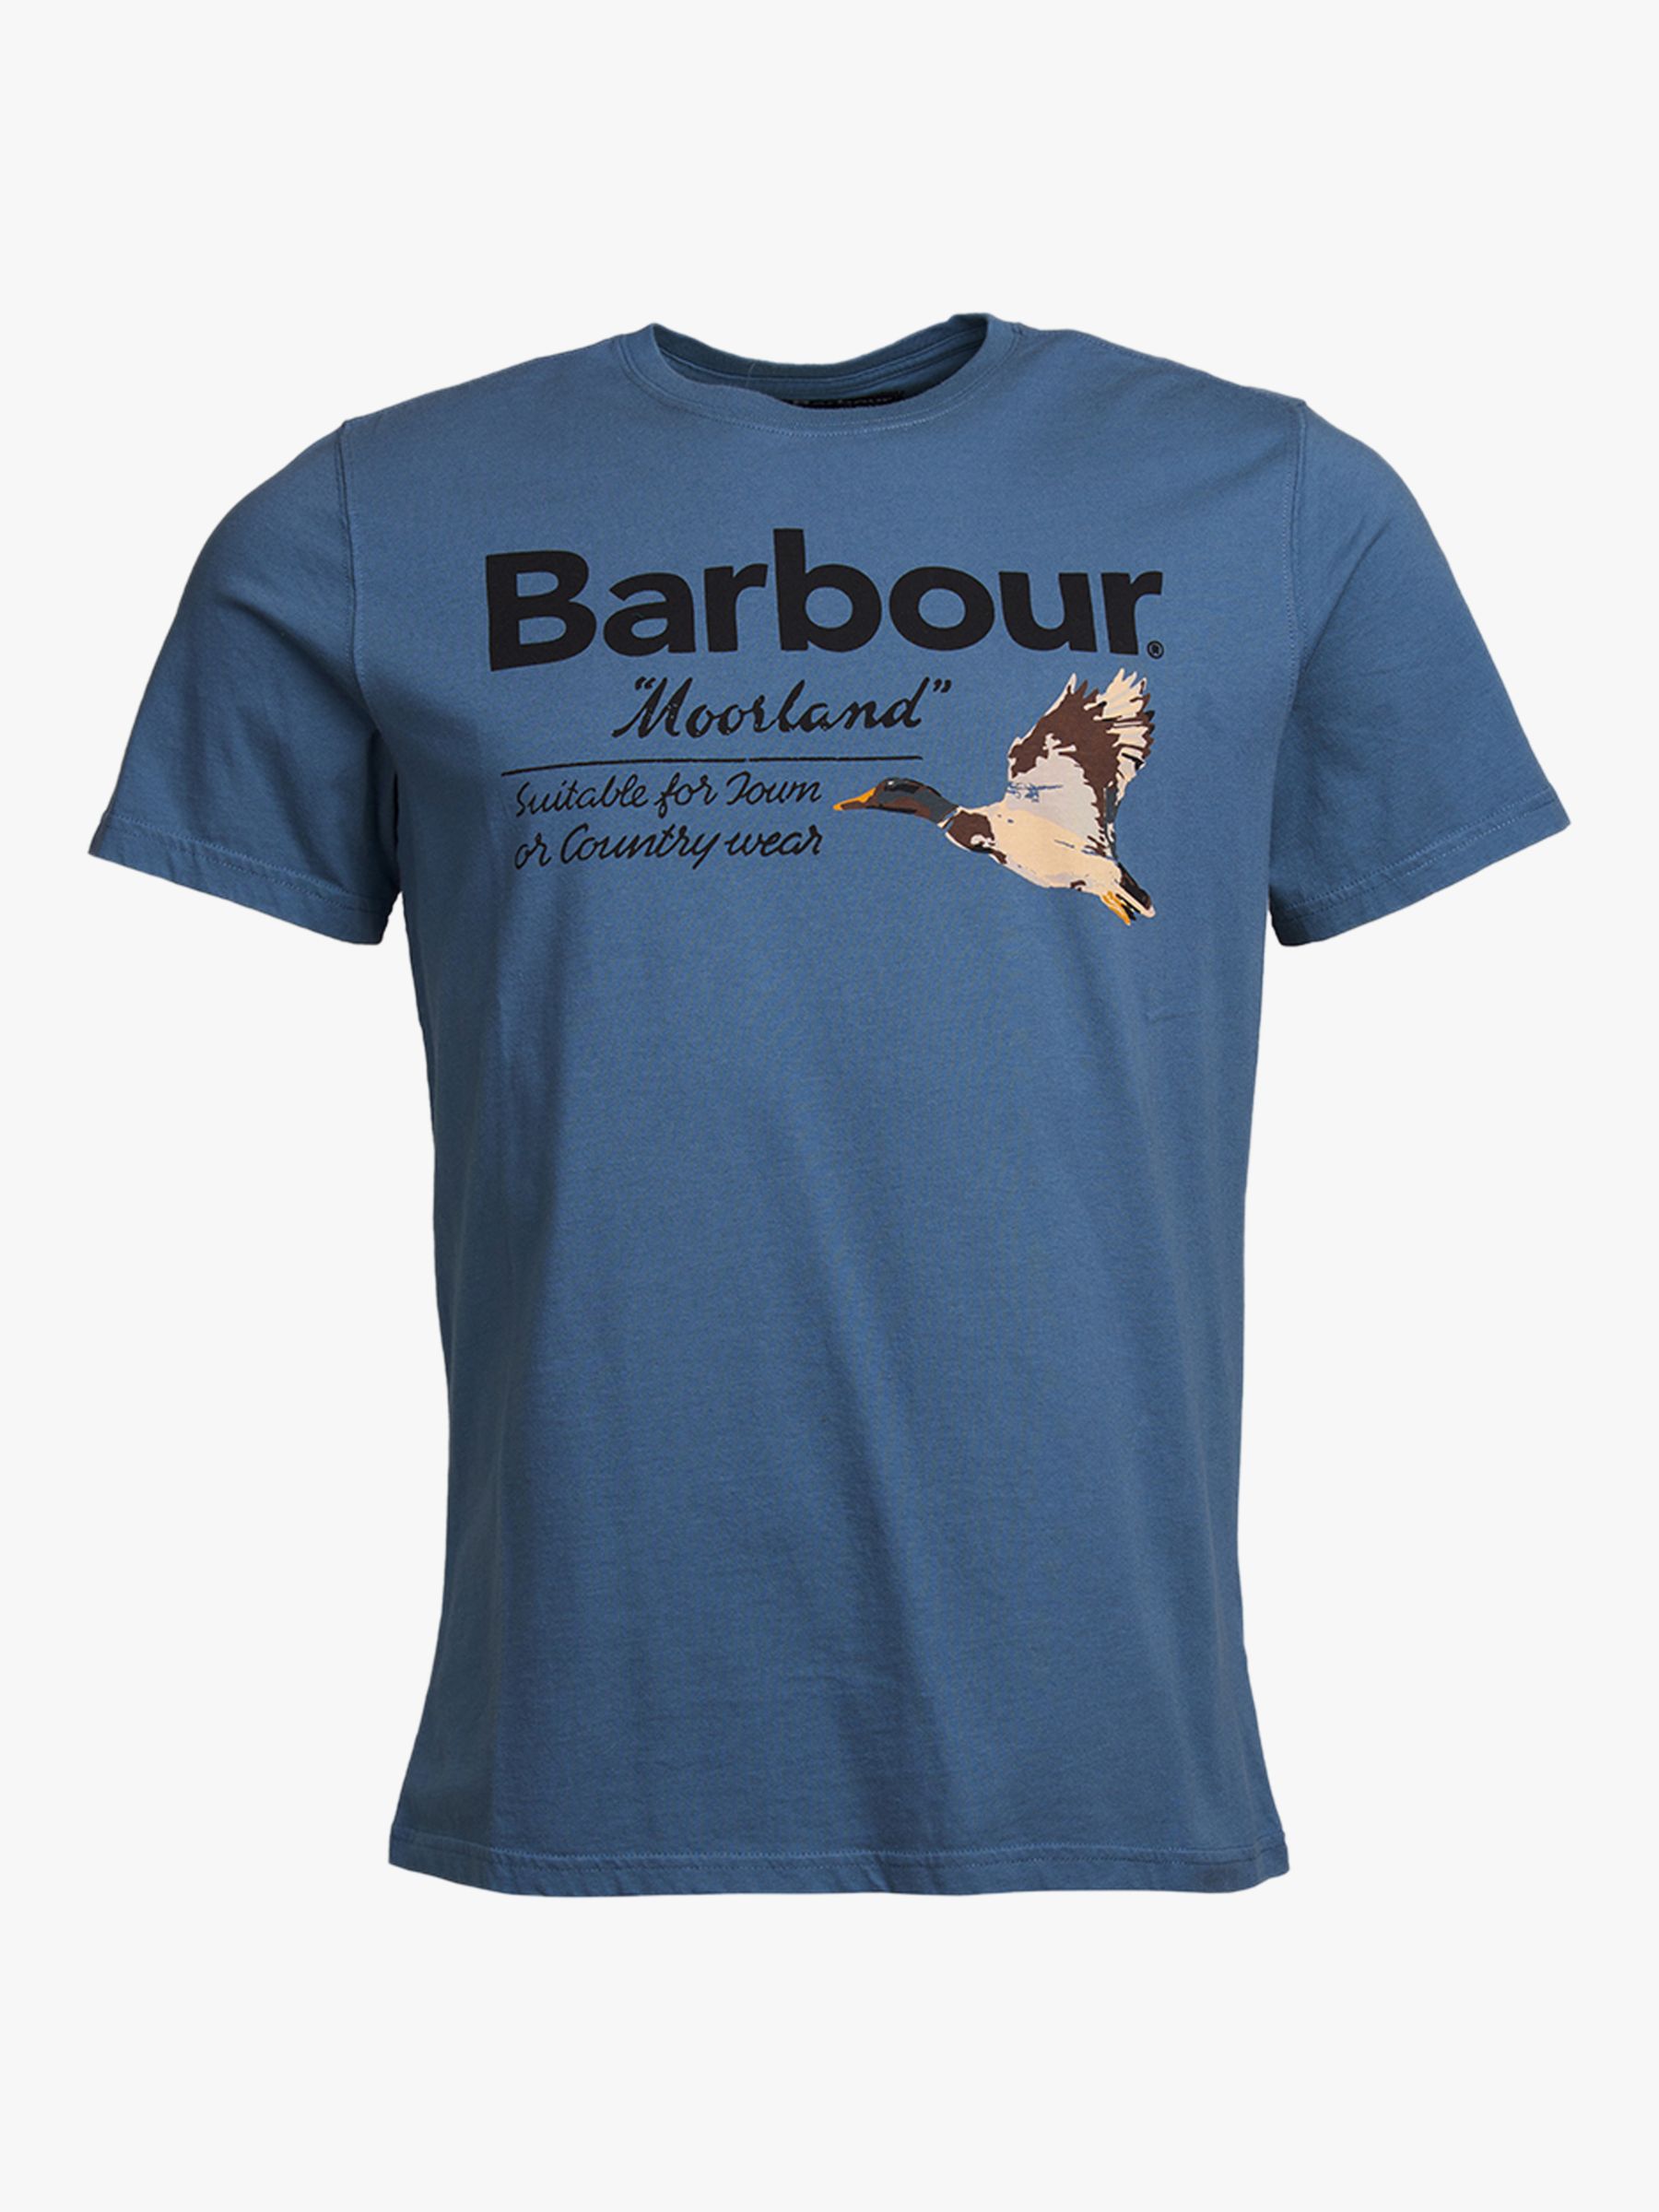 Barbour 'Moorland' Country T-Shirt, DK 